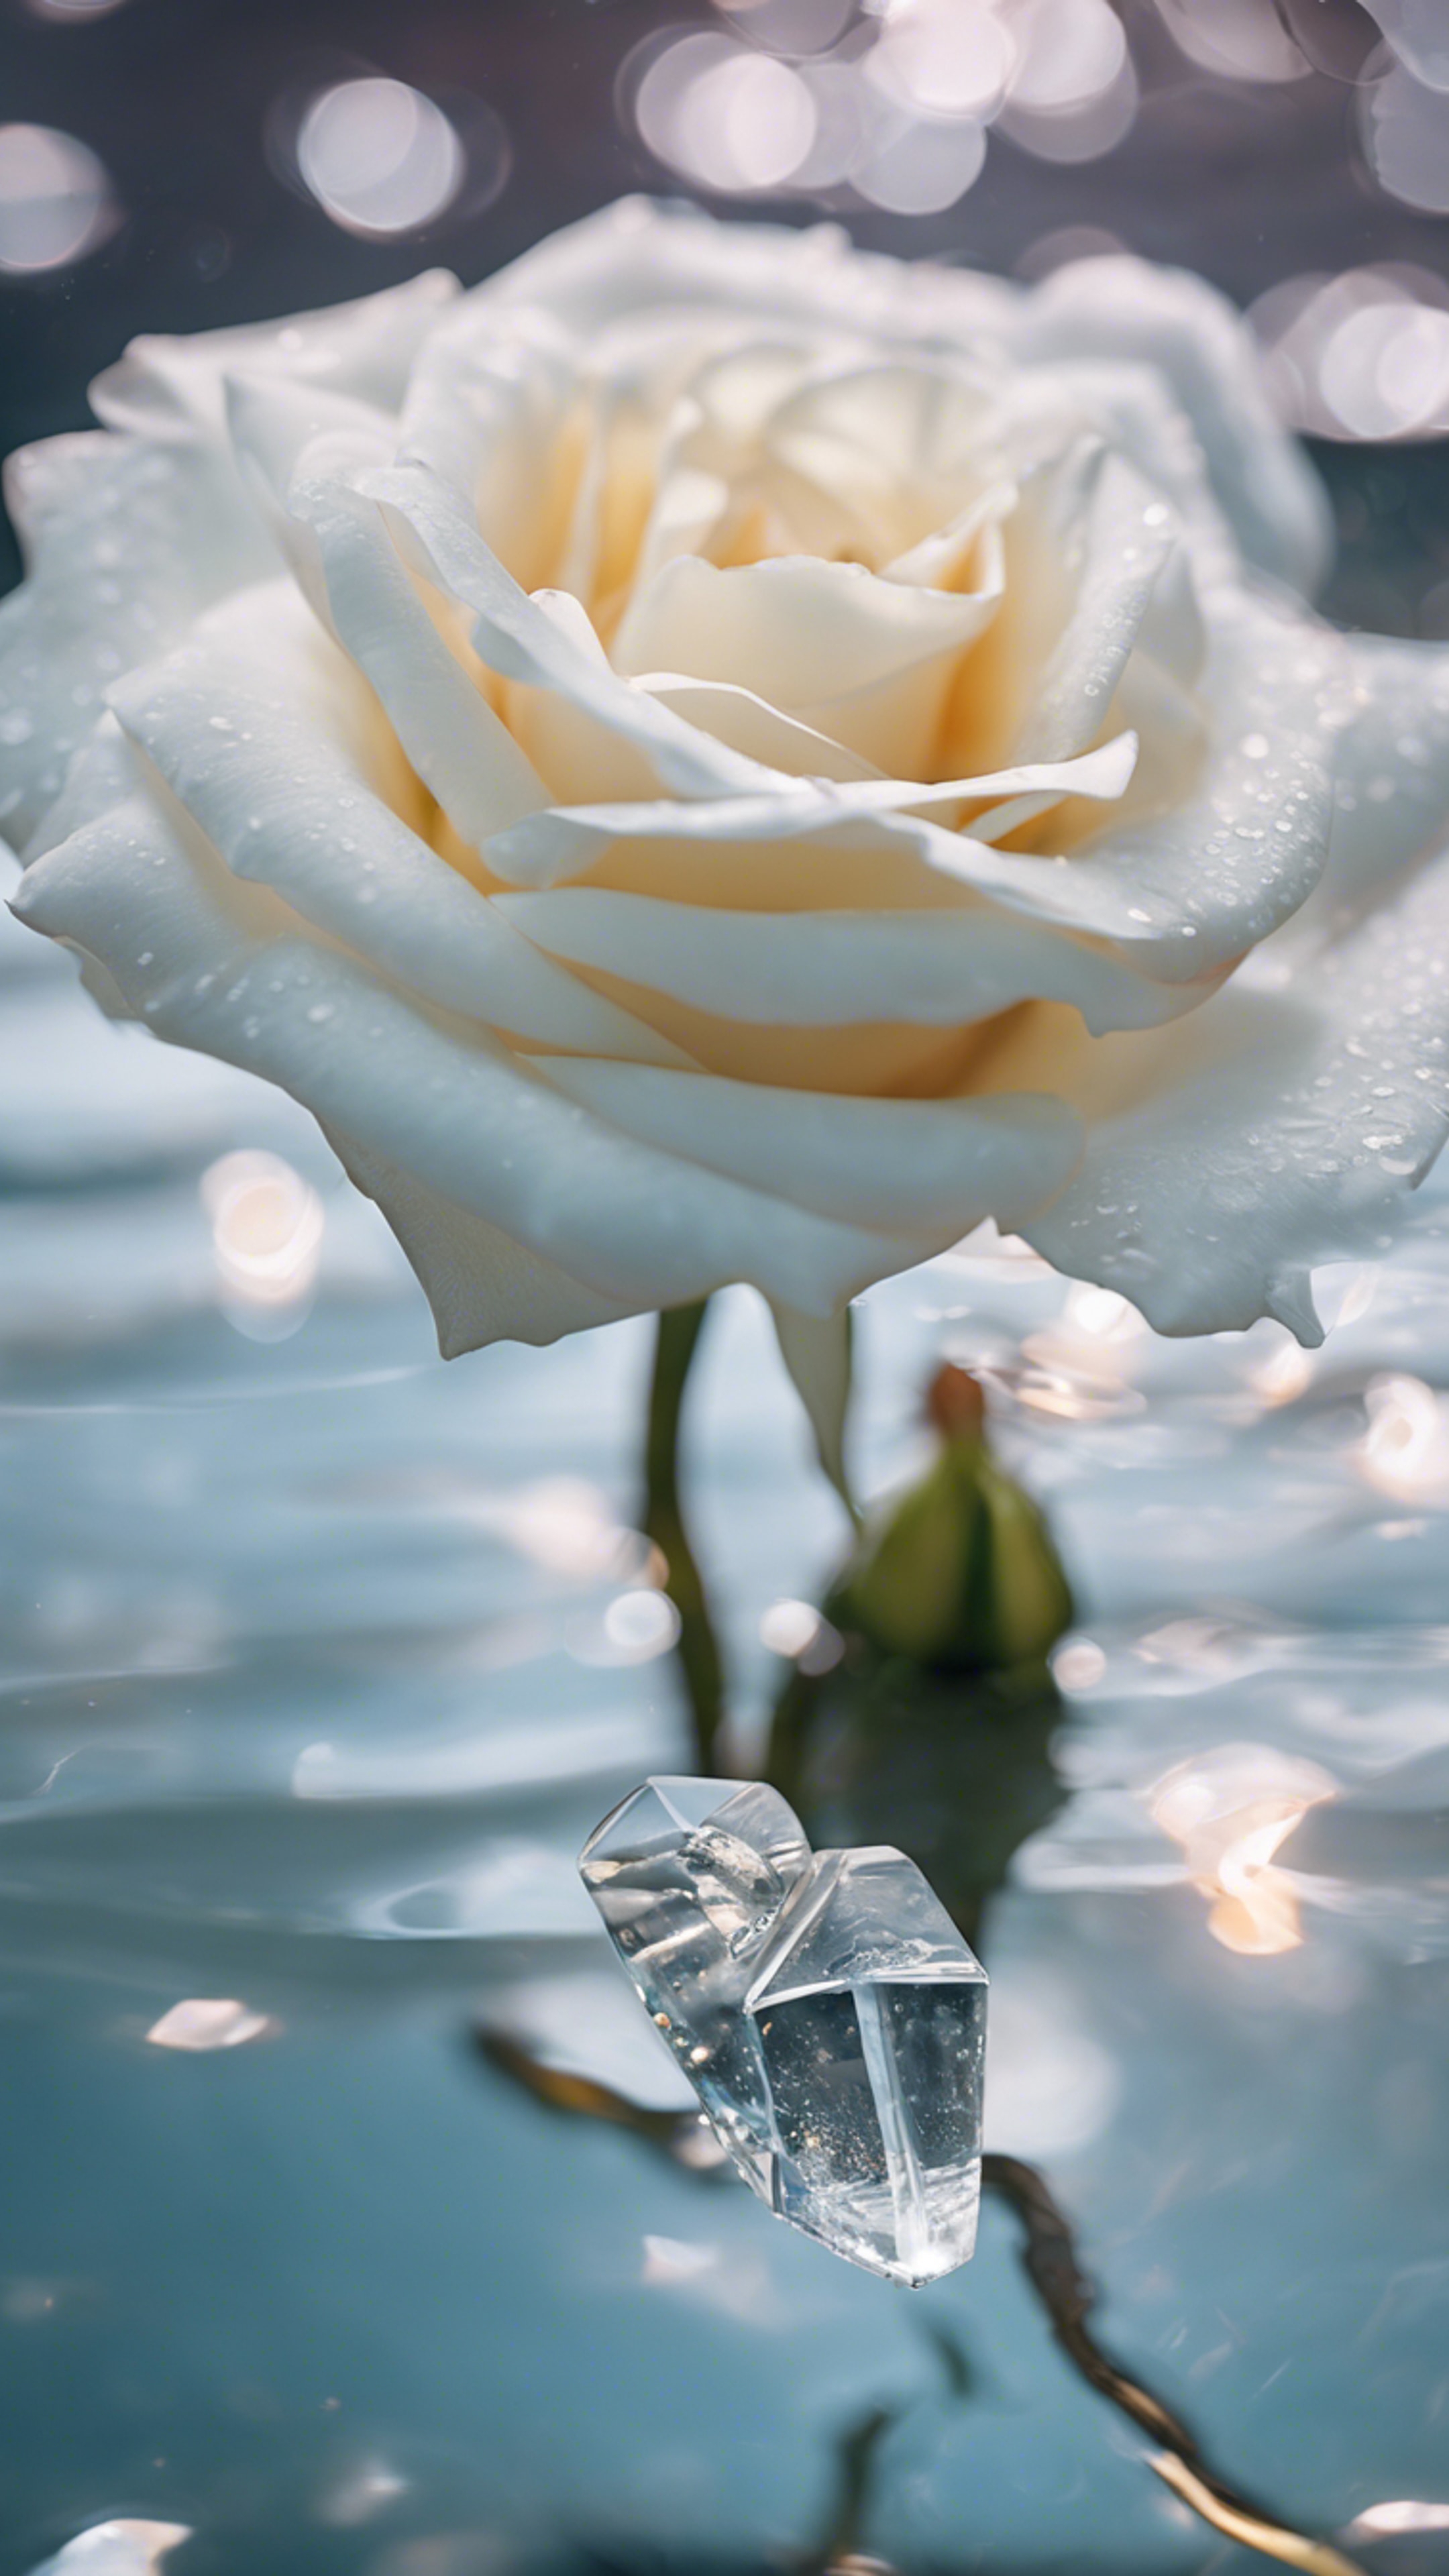 A white rose submerged in clear crystal water, petals gracefully spreading. Валлпапер[af81d3e8e21443b29805]